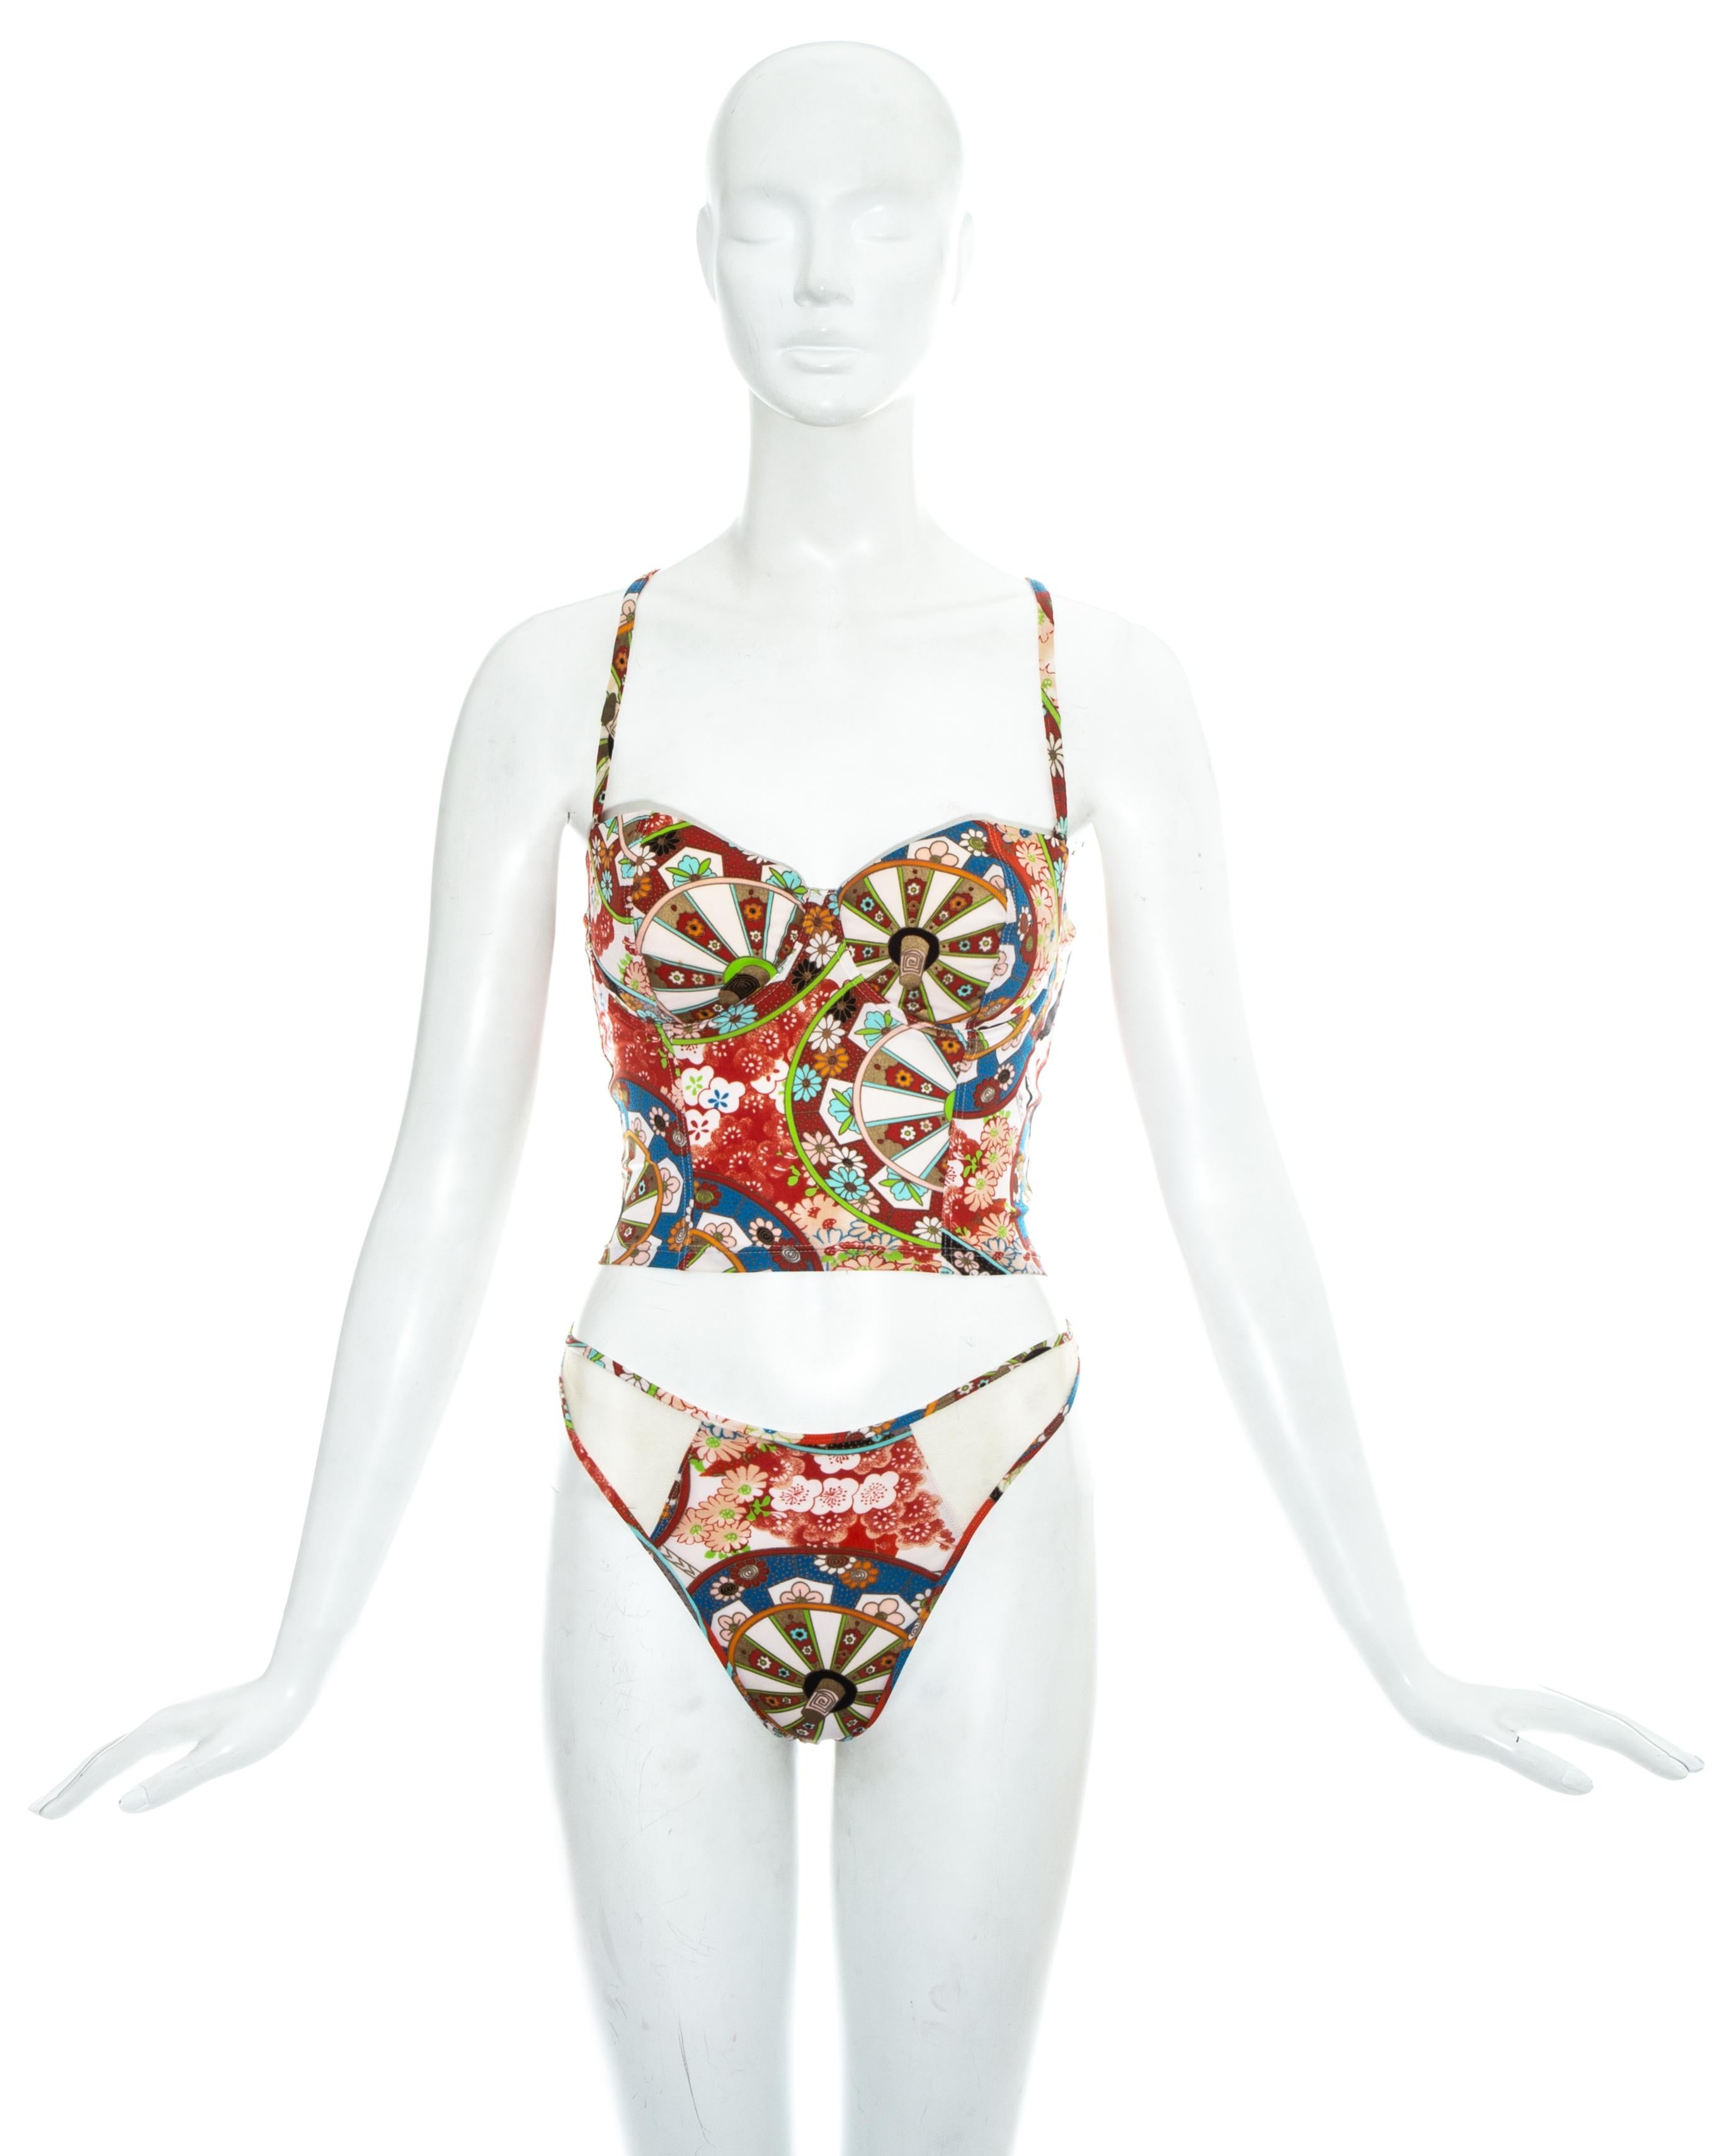 Christian Dior by John Galliano swimwear oriental print thong and corset with mesh inserts. 

Spring-Summer 2001